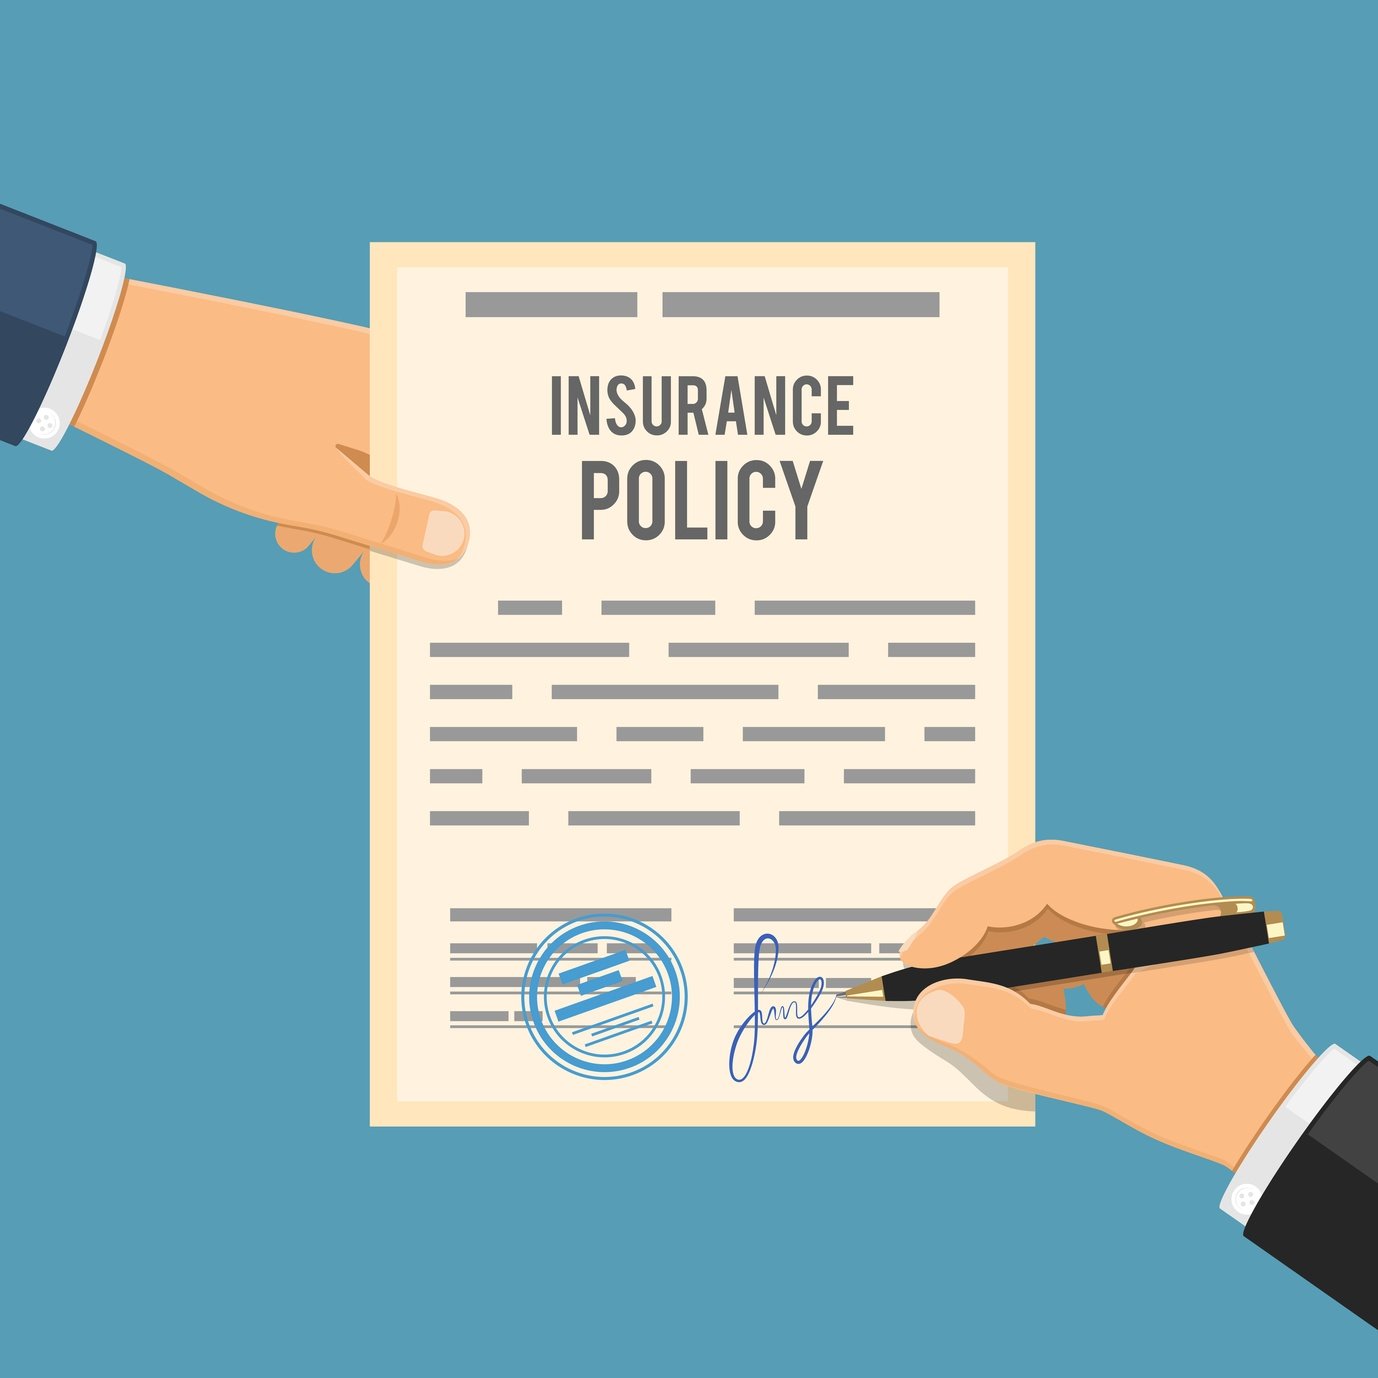 Understand your Insurance Policy Documents